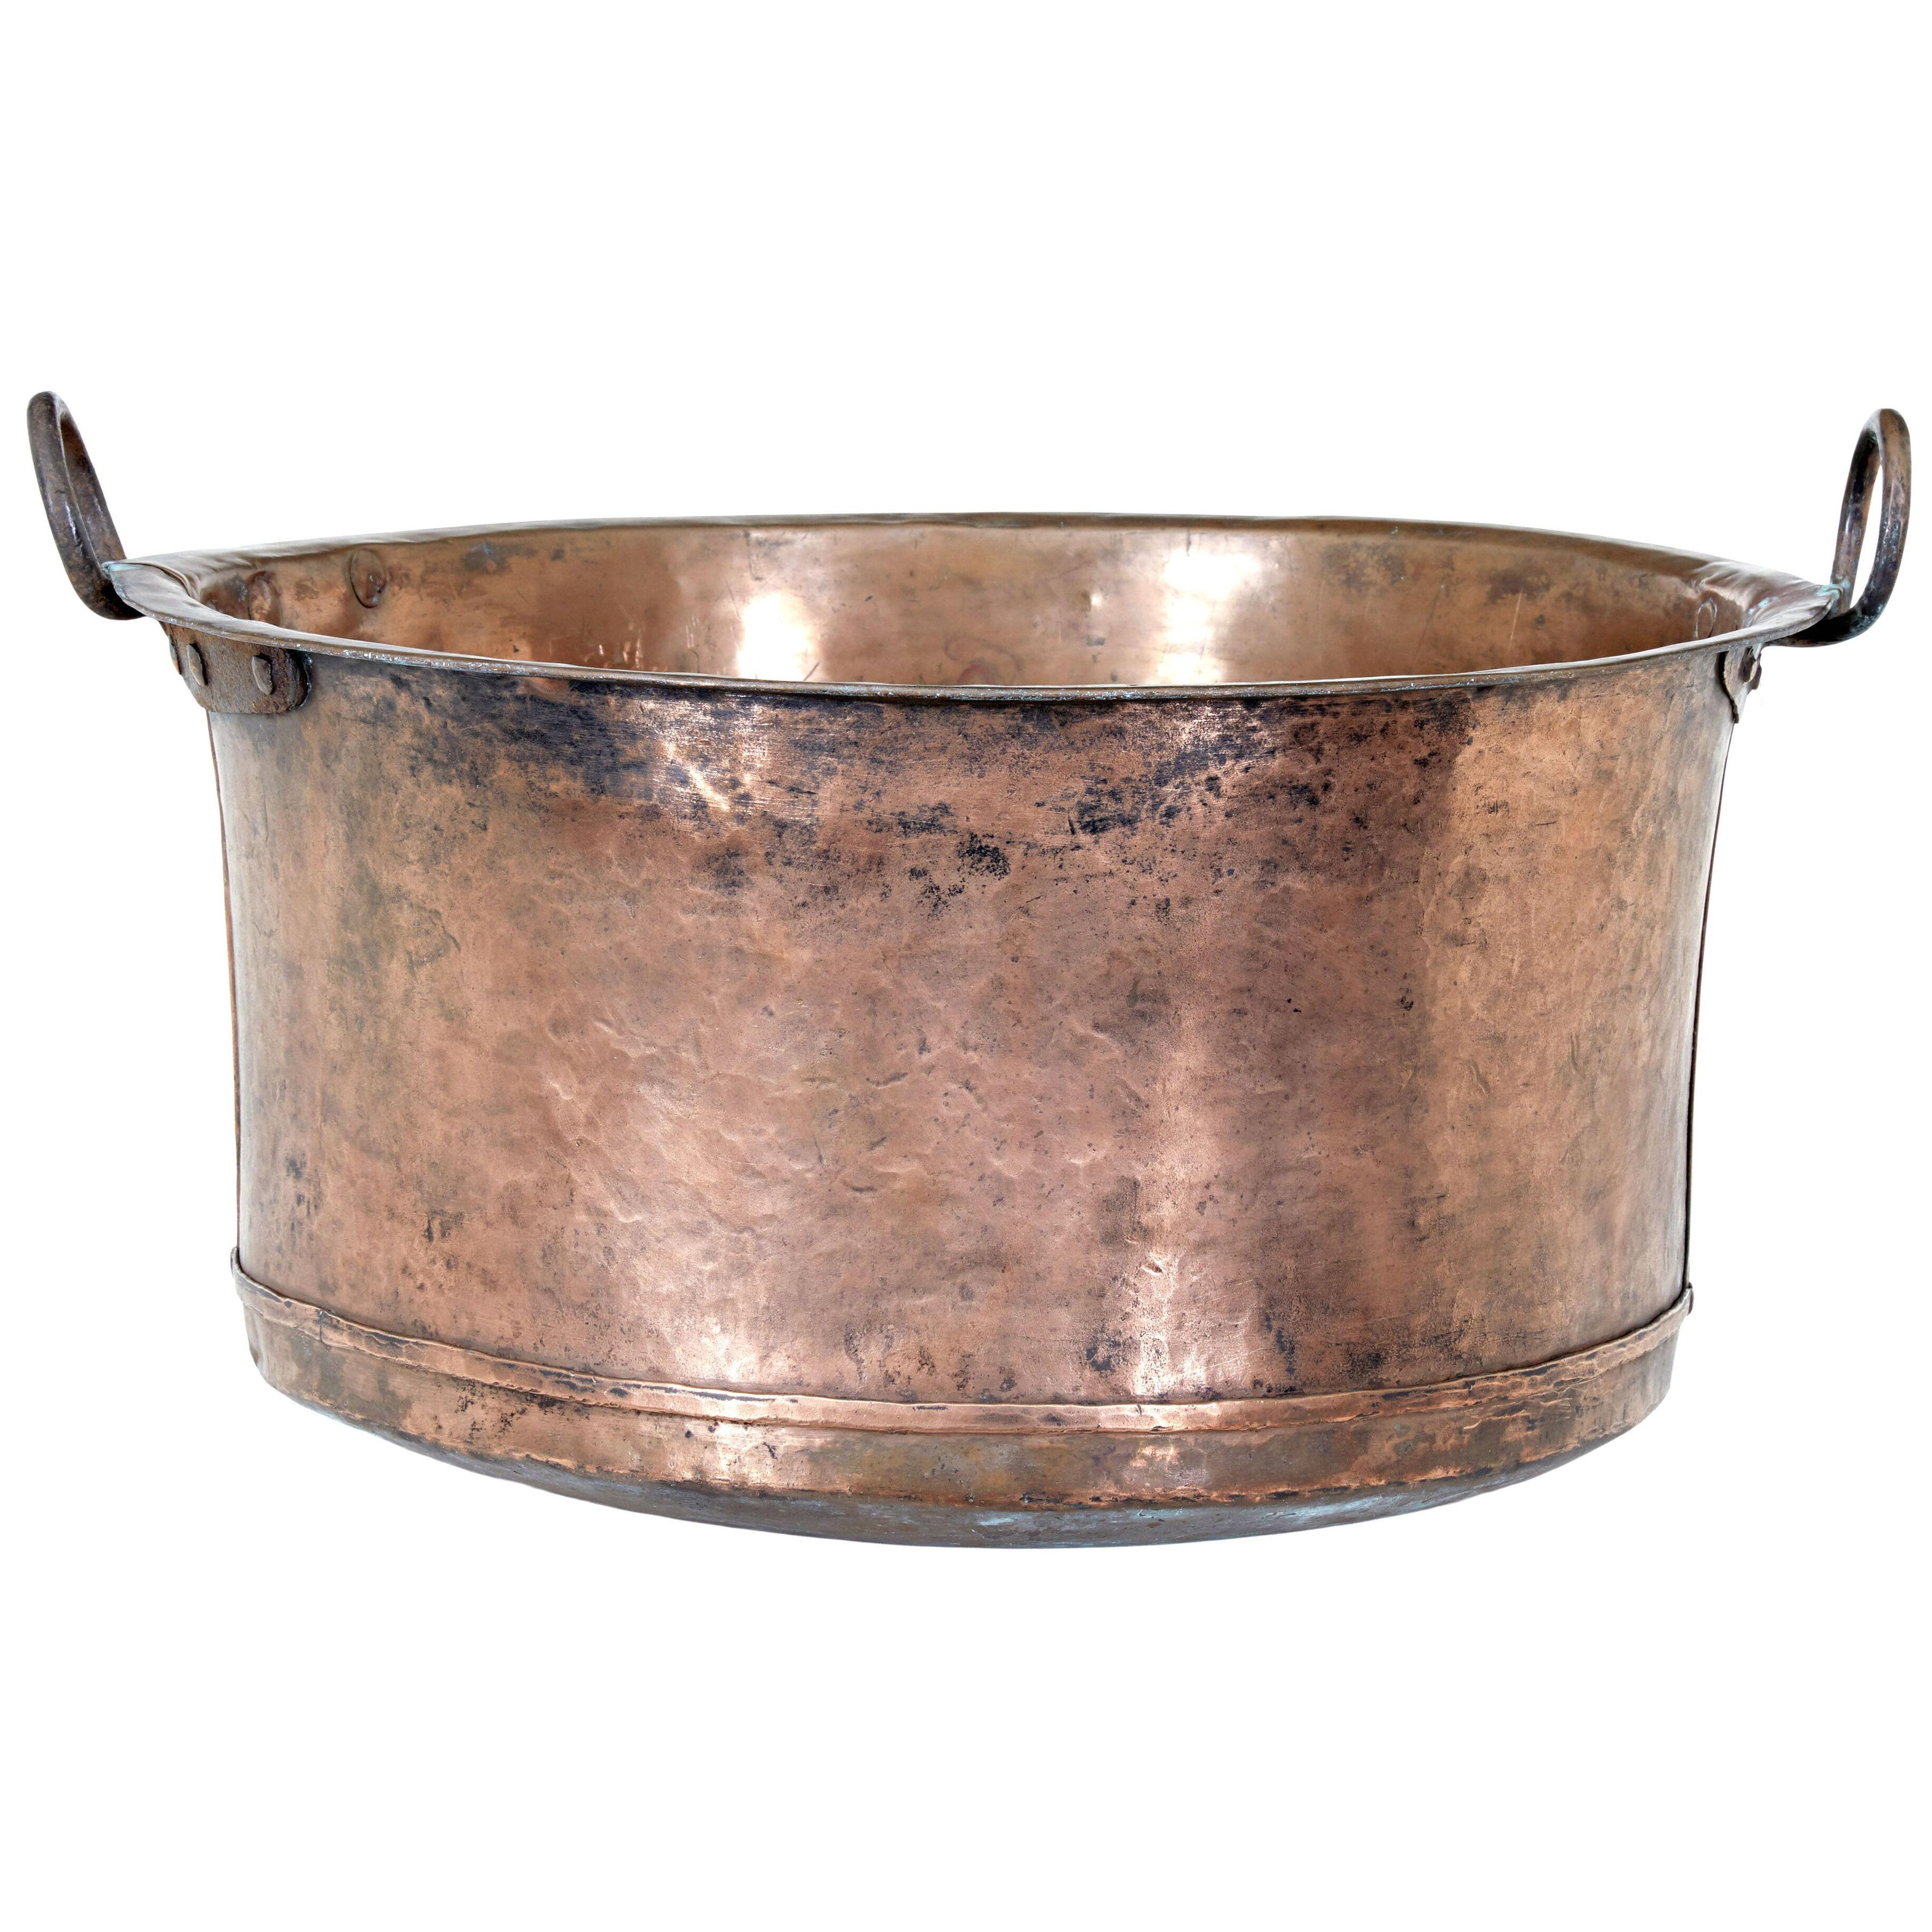 LARGE 19TH CENTURY COPPER COOKING VESSEL